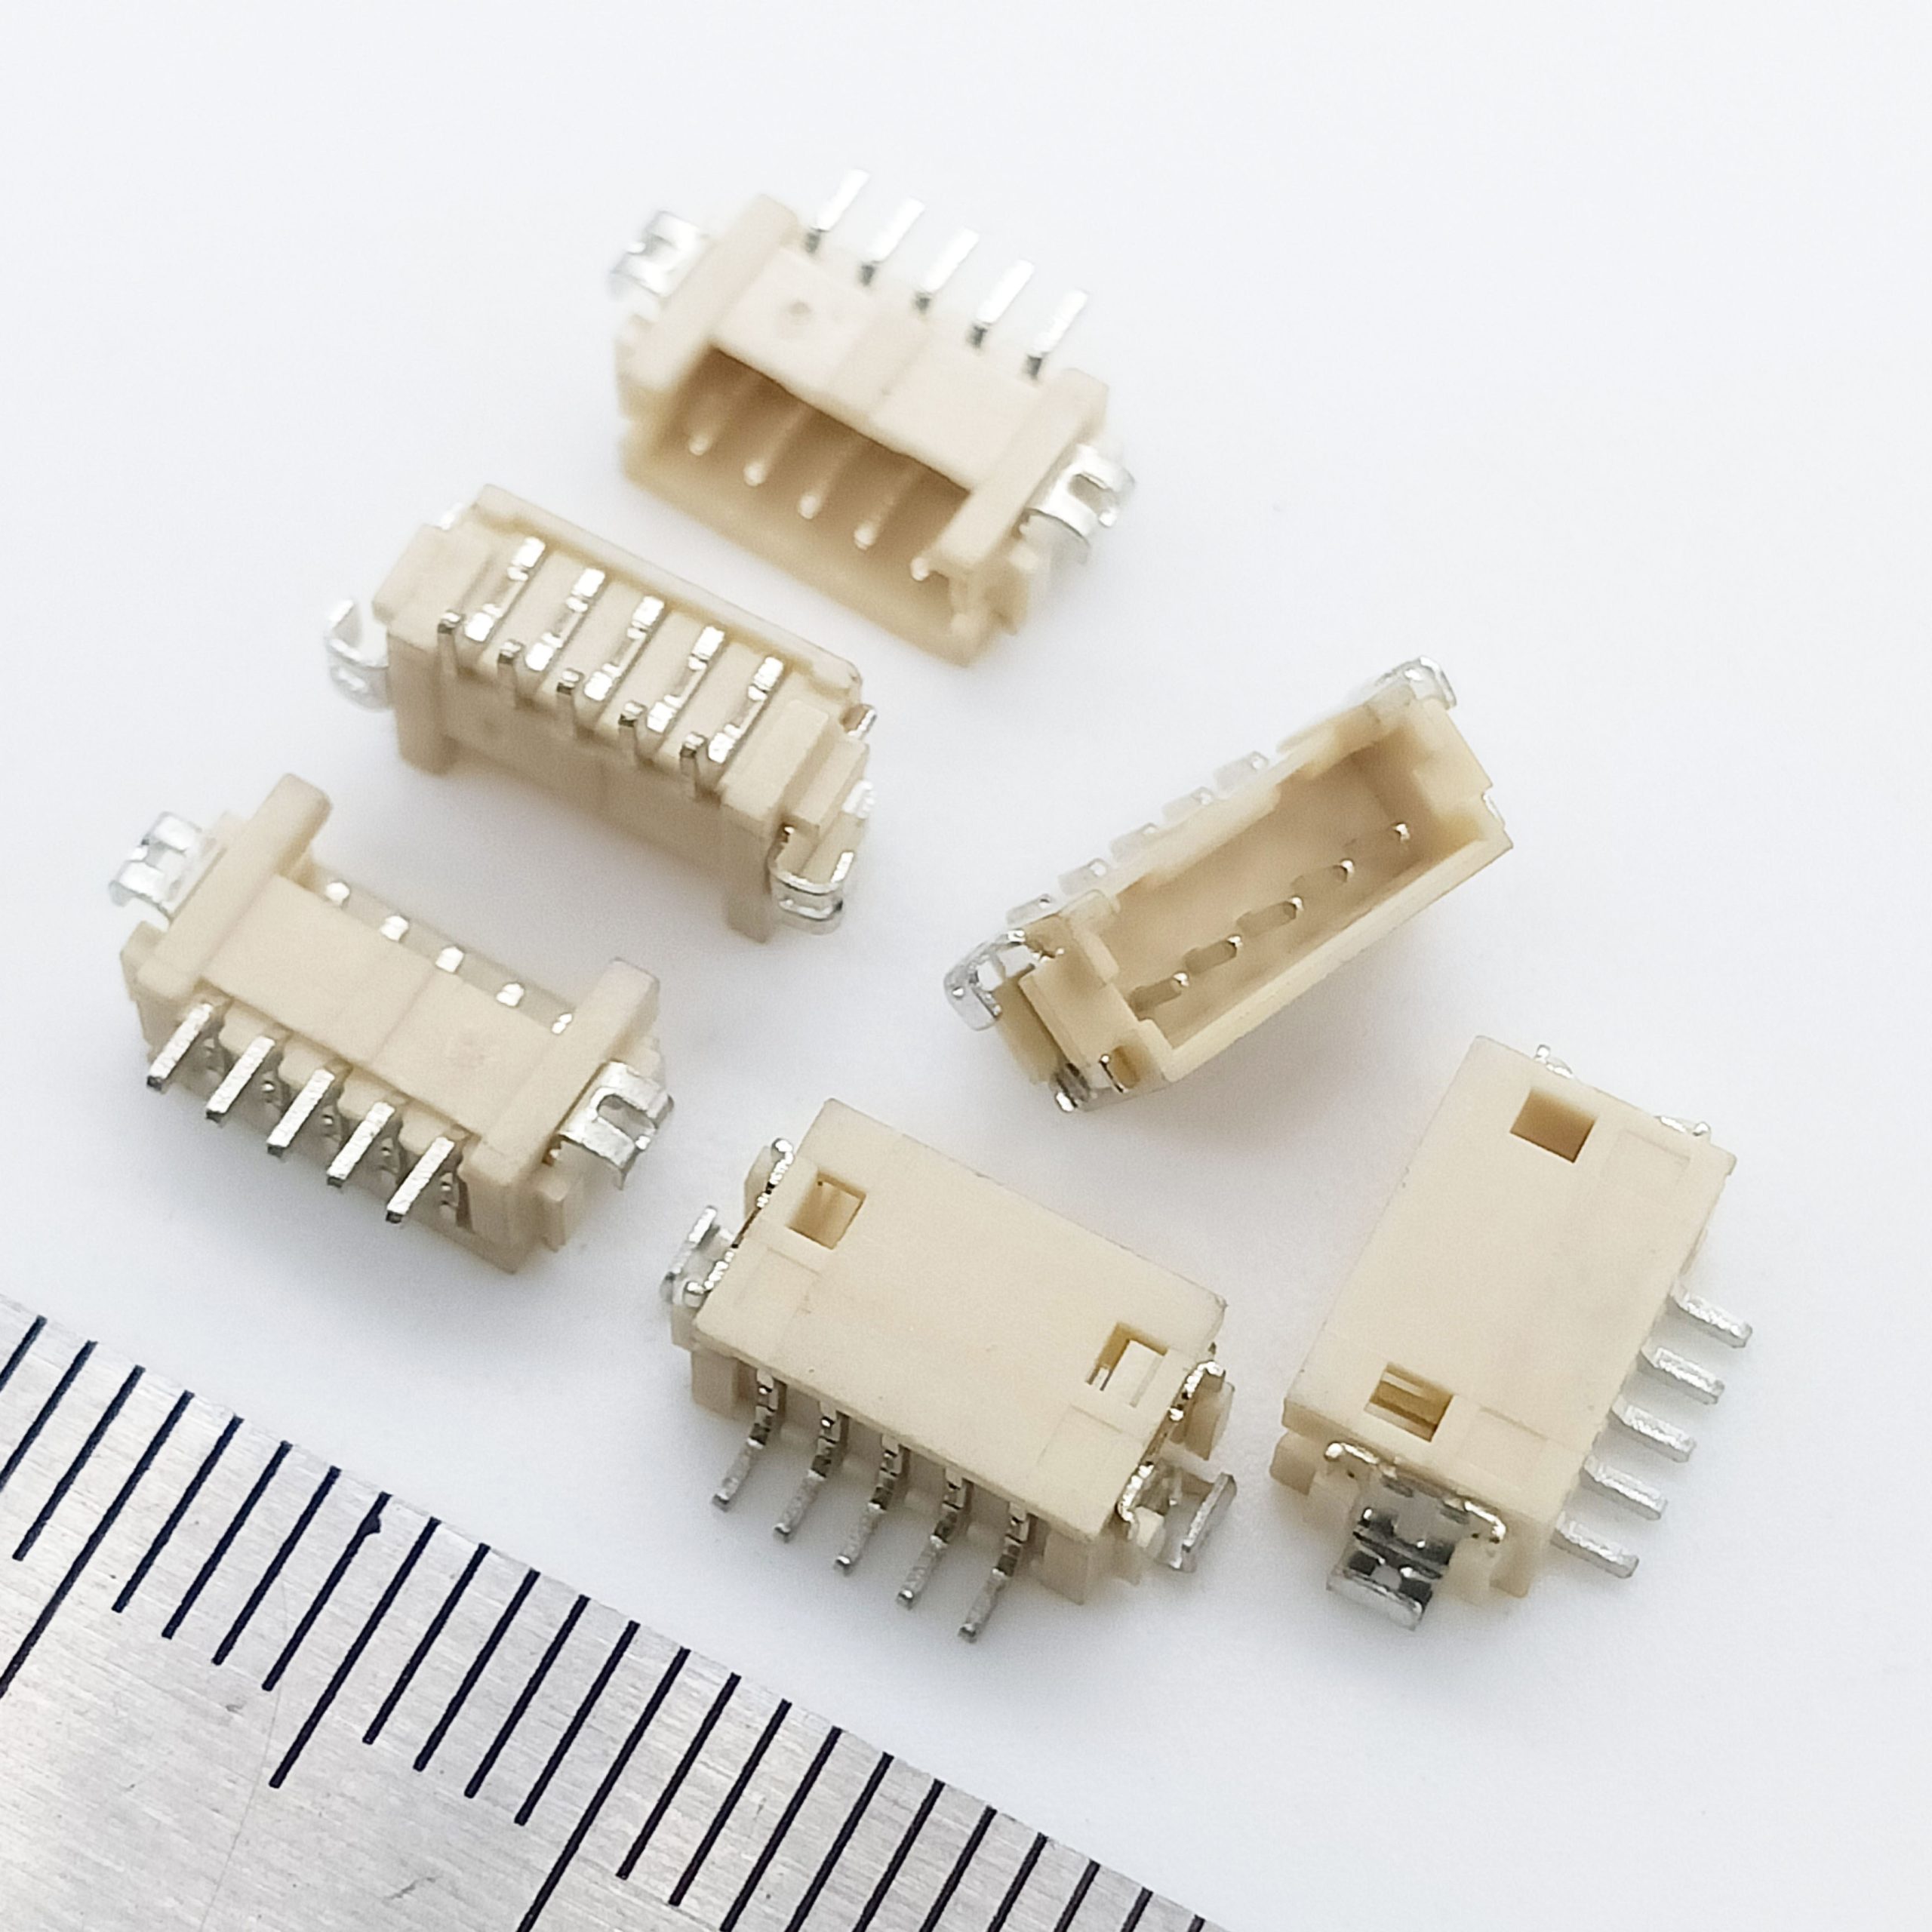 DF13A-5P-1.25H is a 5-pin board-to-wire connector with a 1.25mm pitch, offering dependable and secure connections for various electronic applications. 